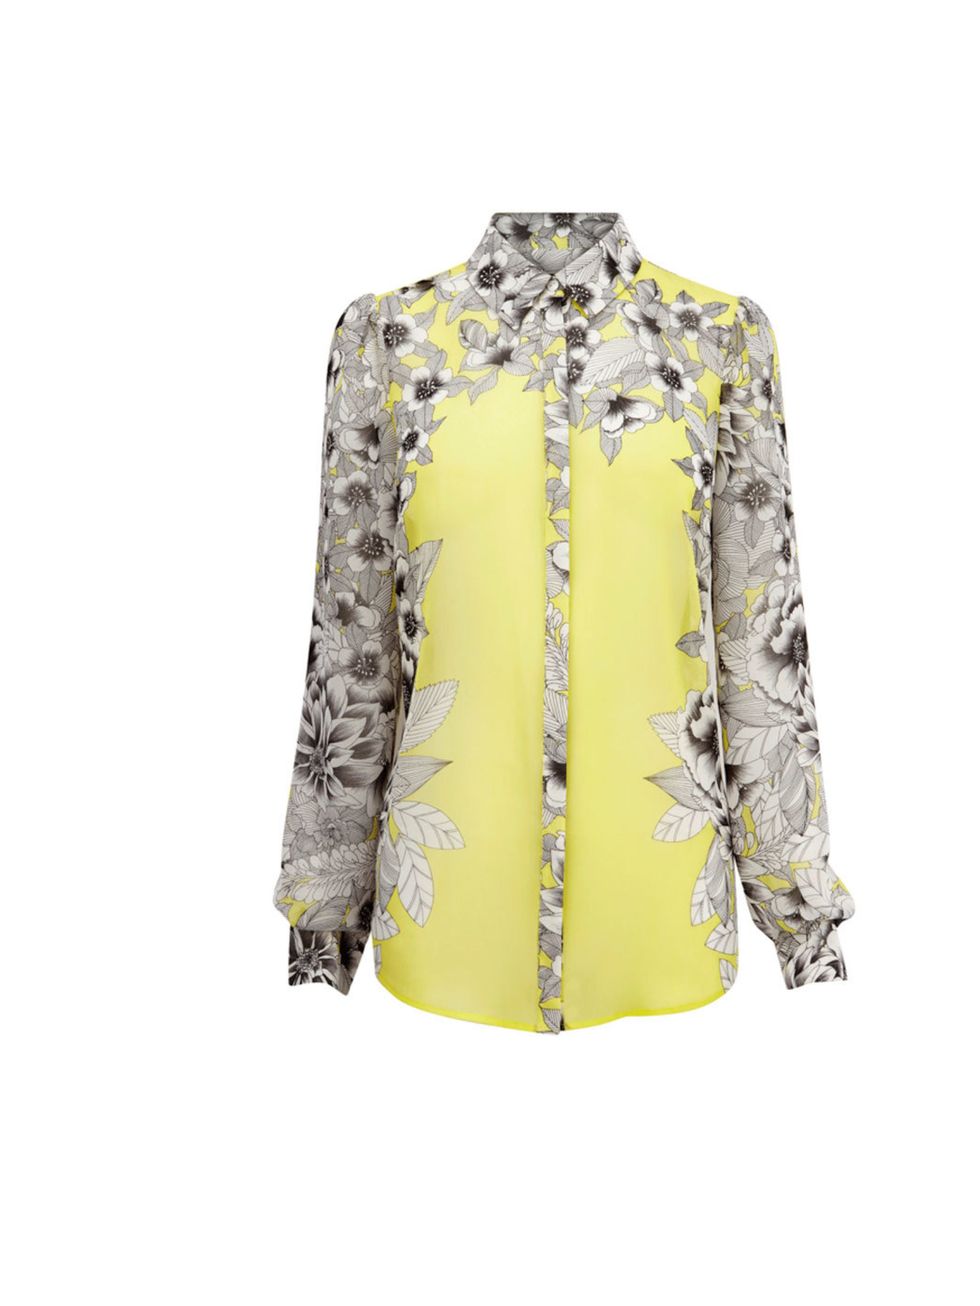 <p>Warehouse have established themselves as the go-to high street store for beautiful prints this season... Warehouse floral blouse, £45</p><p><a href="http://shopping.elleuk.com/browse?fts=warehouse+mirrored+floral+blouse">BUY NOW</a></p>